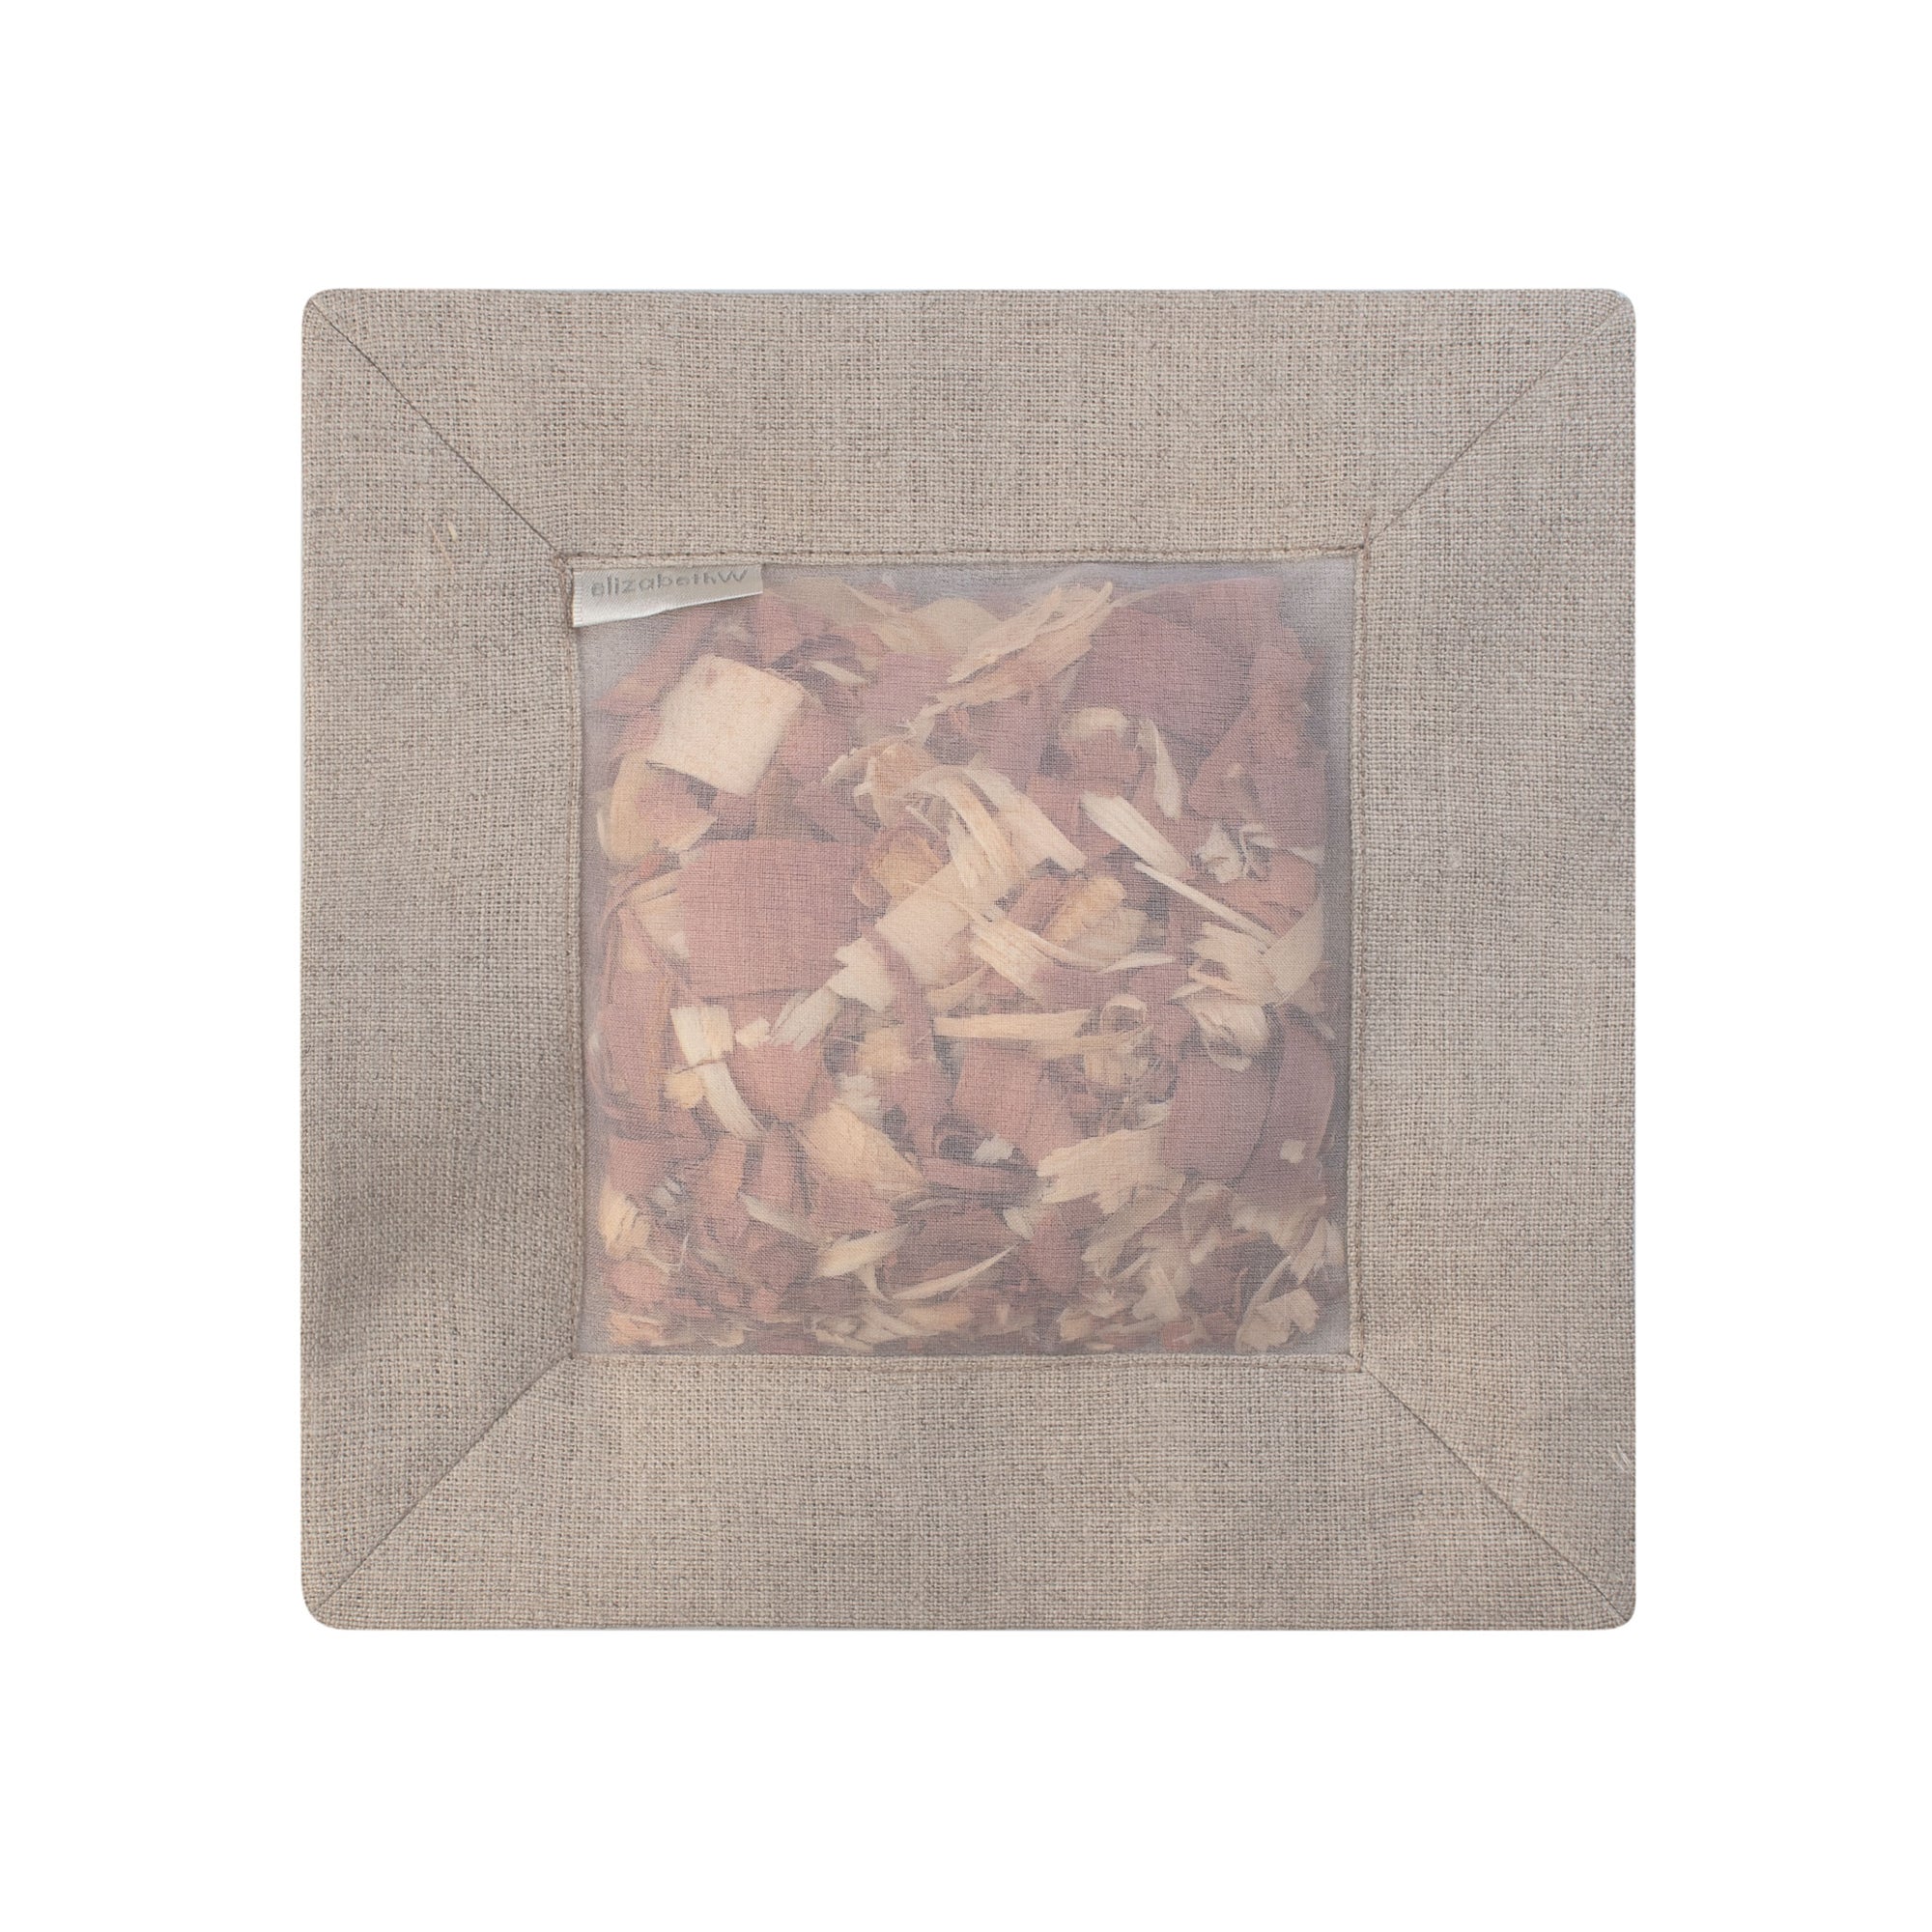 Cedar filled inside of a "natural" colored square sachet with a transparent screen